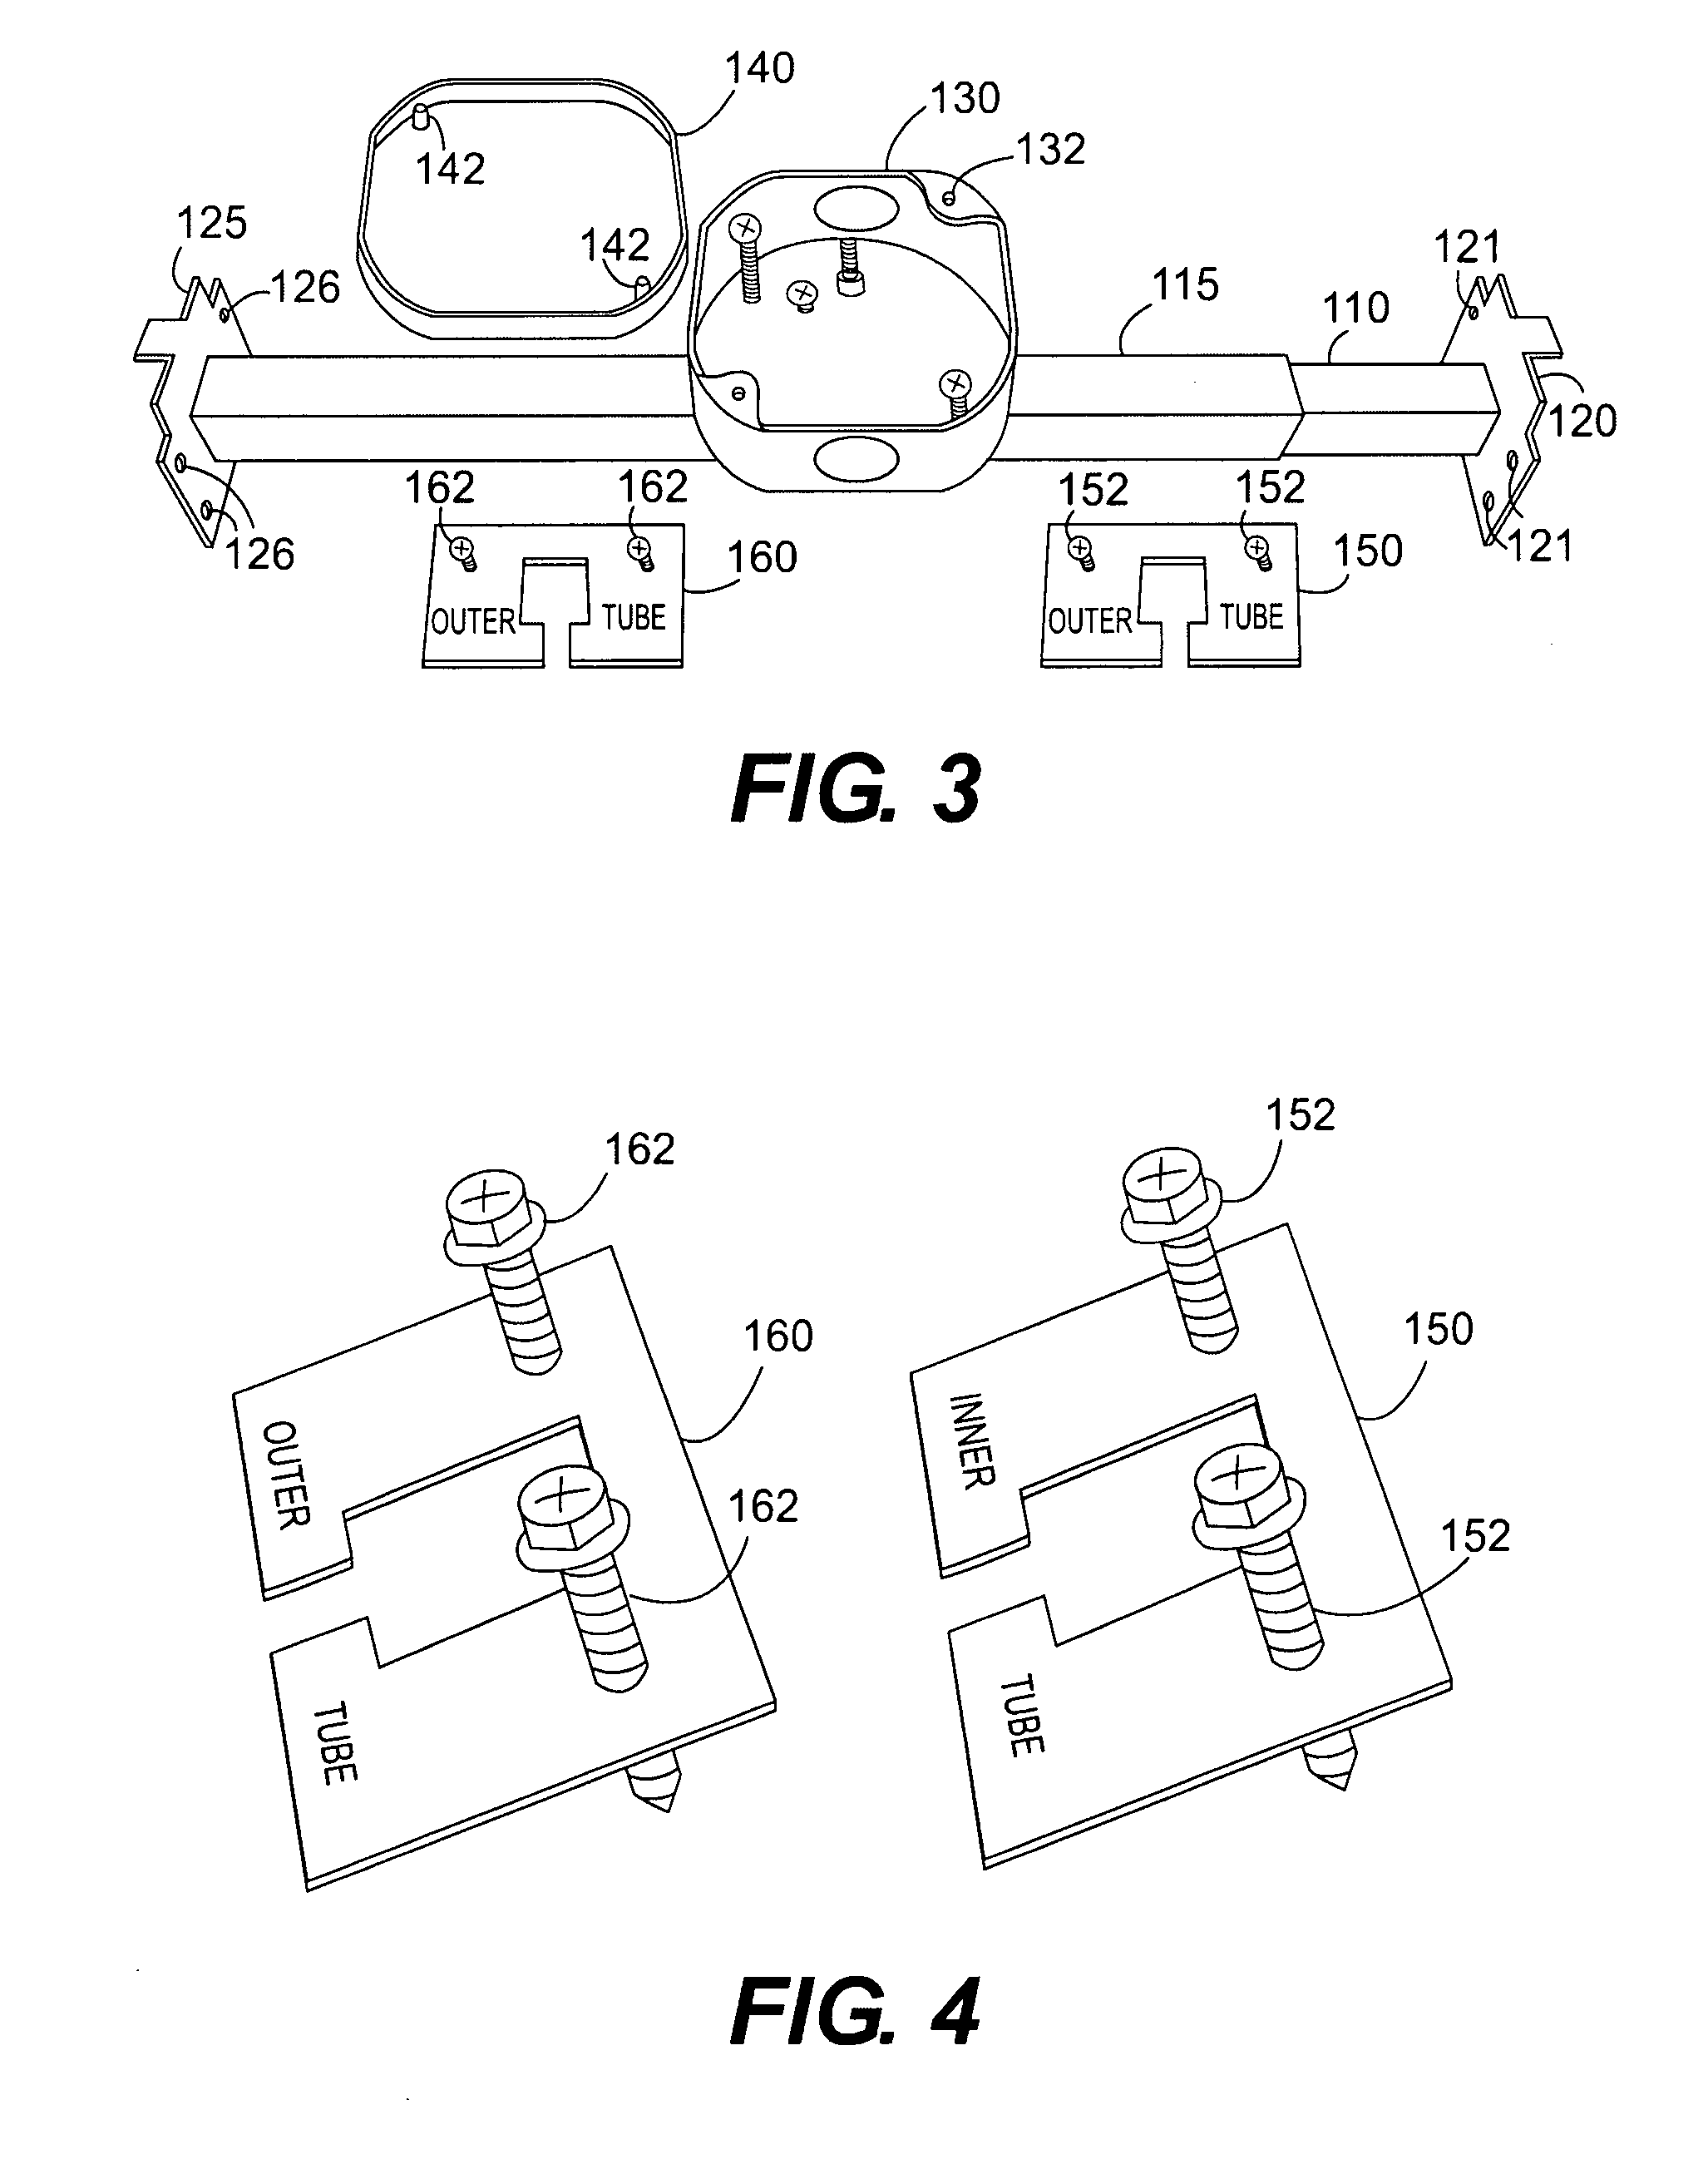 Fastening device for mounting an electrical fixture